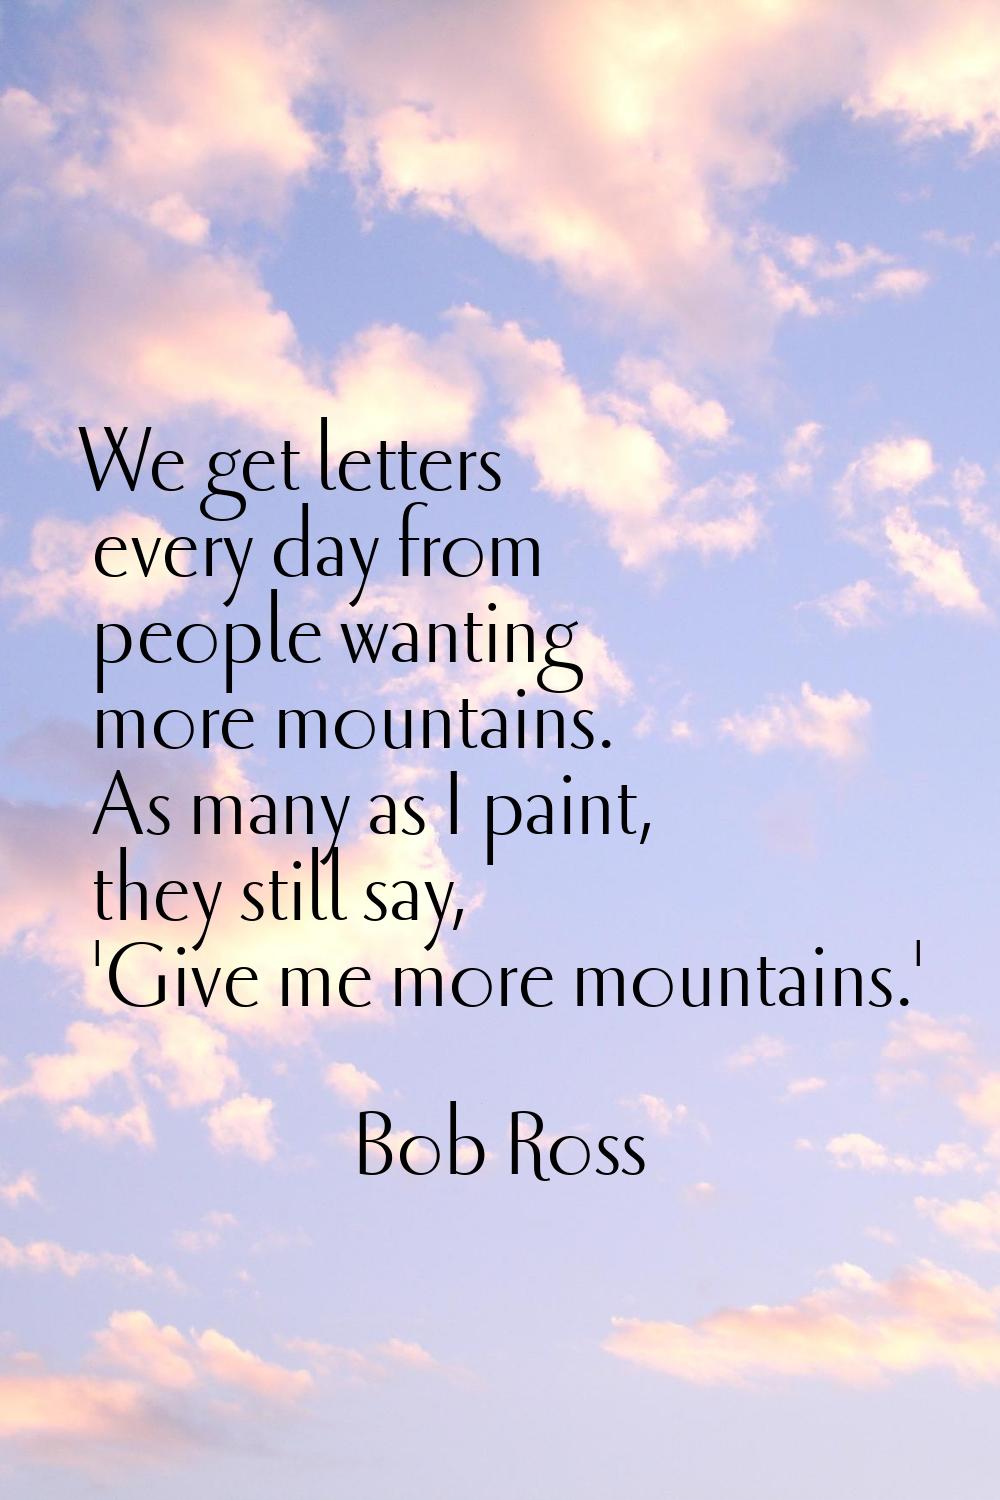 We get letters every day from people wanting more mountains. As many as I paint, they still say, 'G